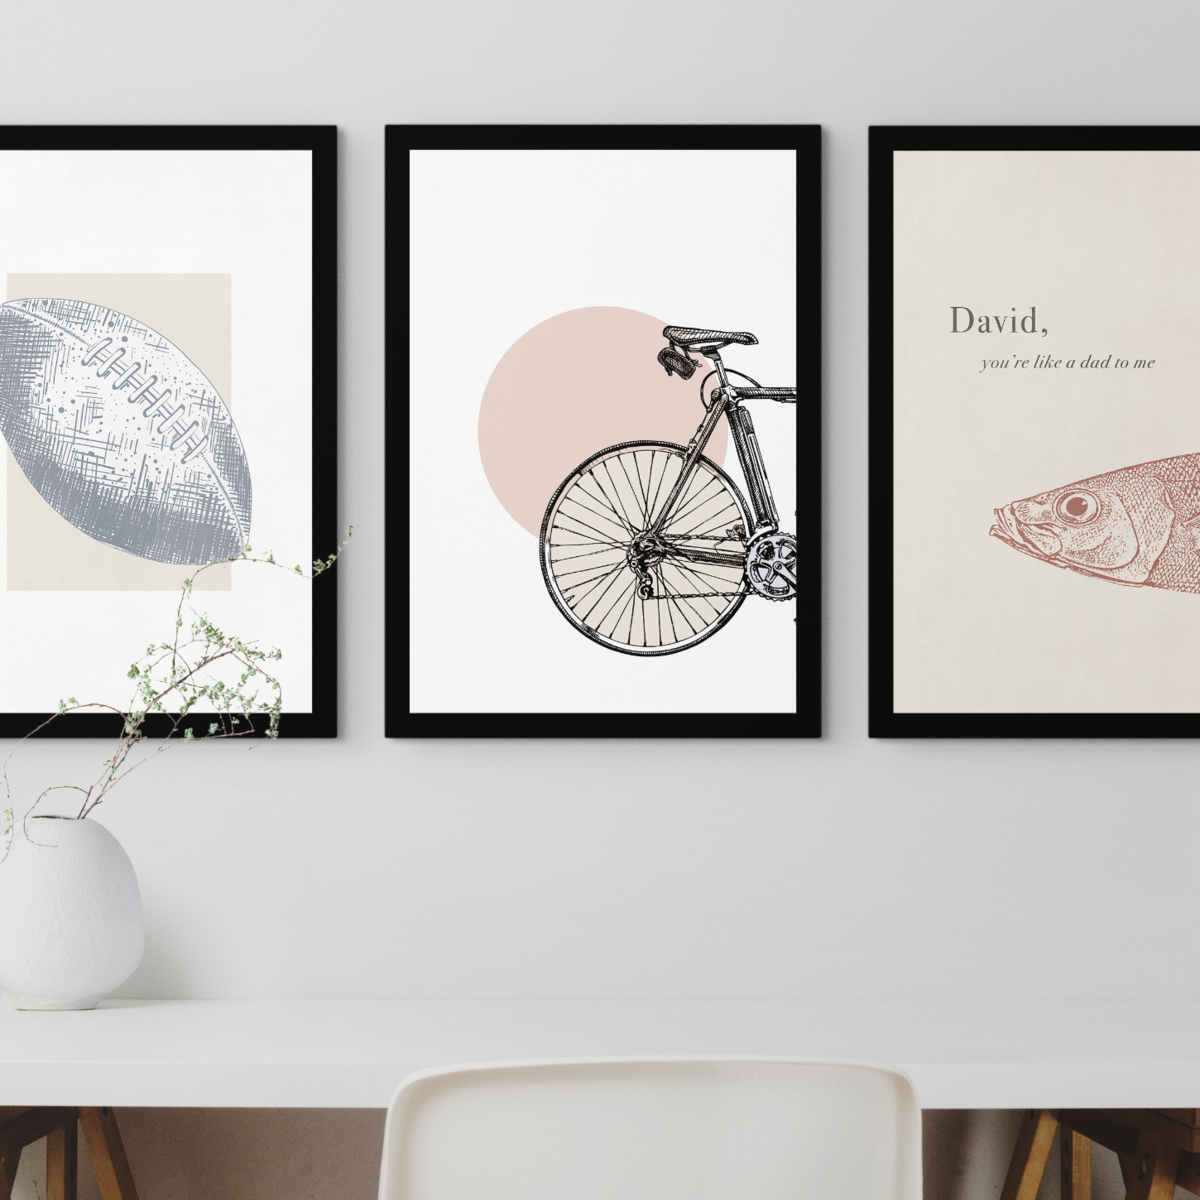 Image of three Art prints designed by TLPS - Rugby ball, bike and fish